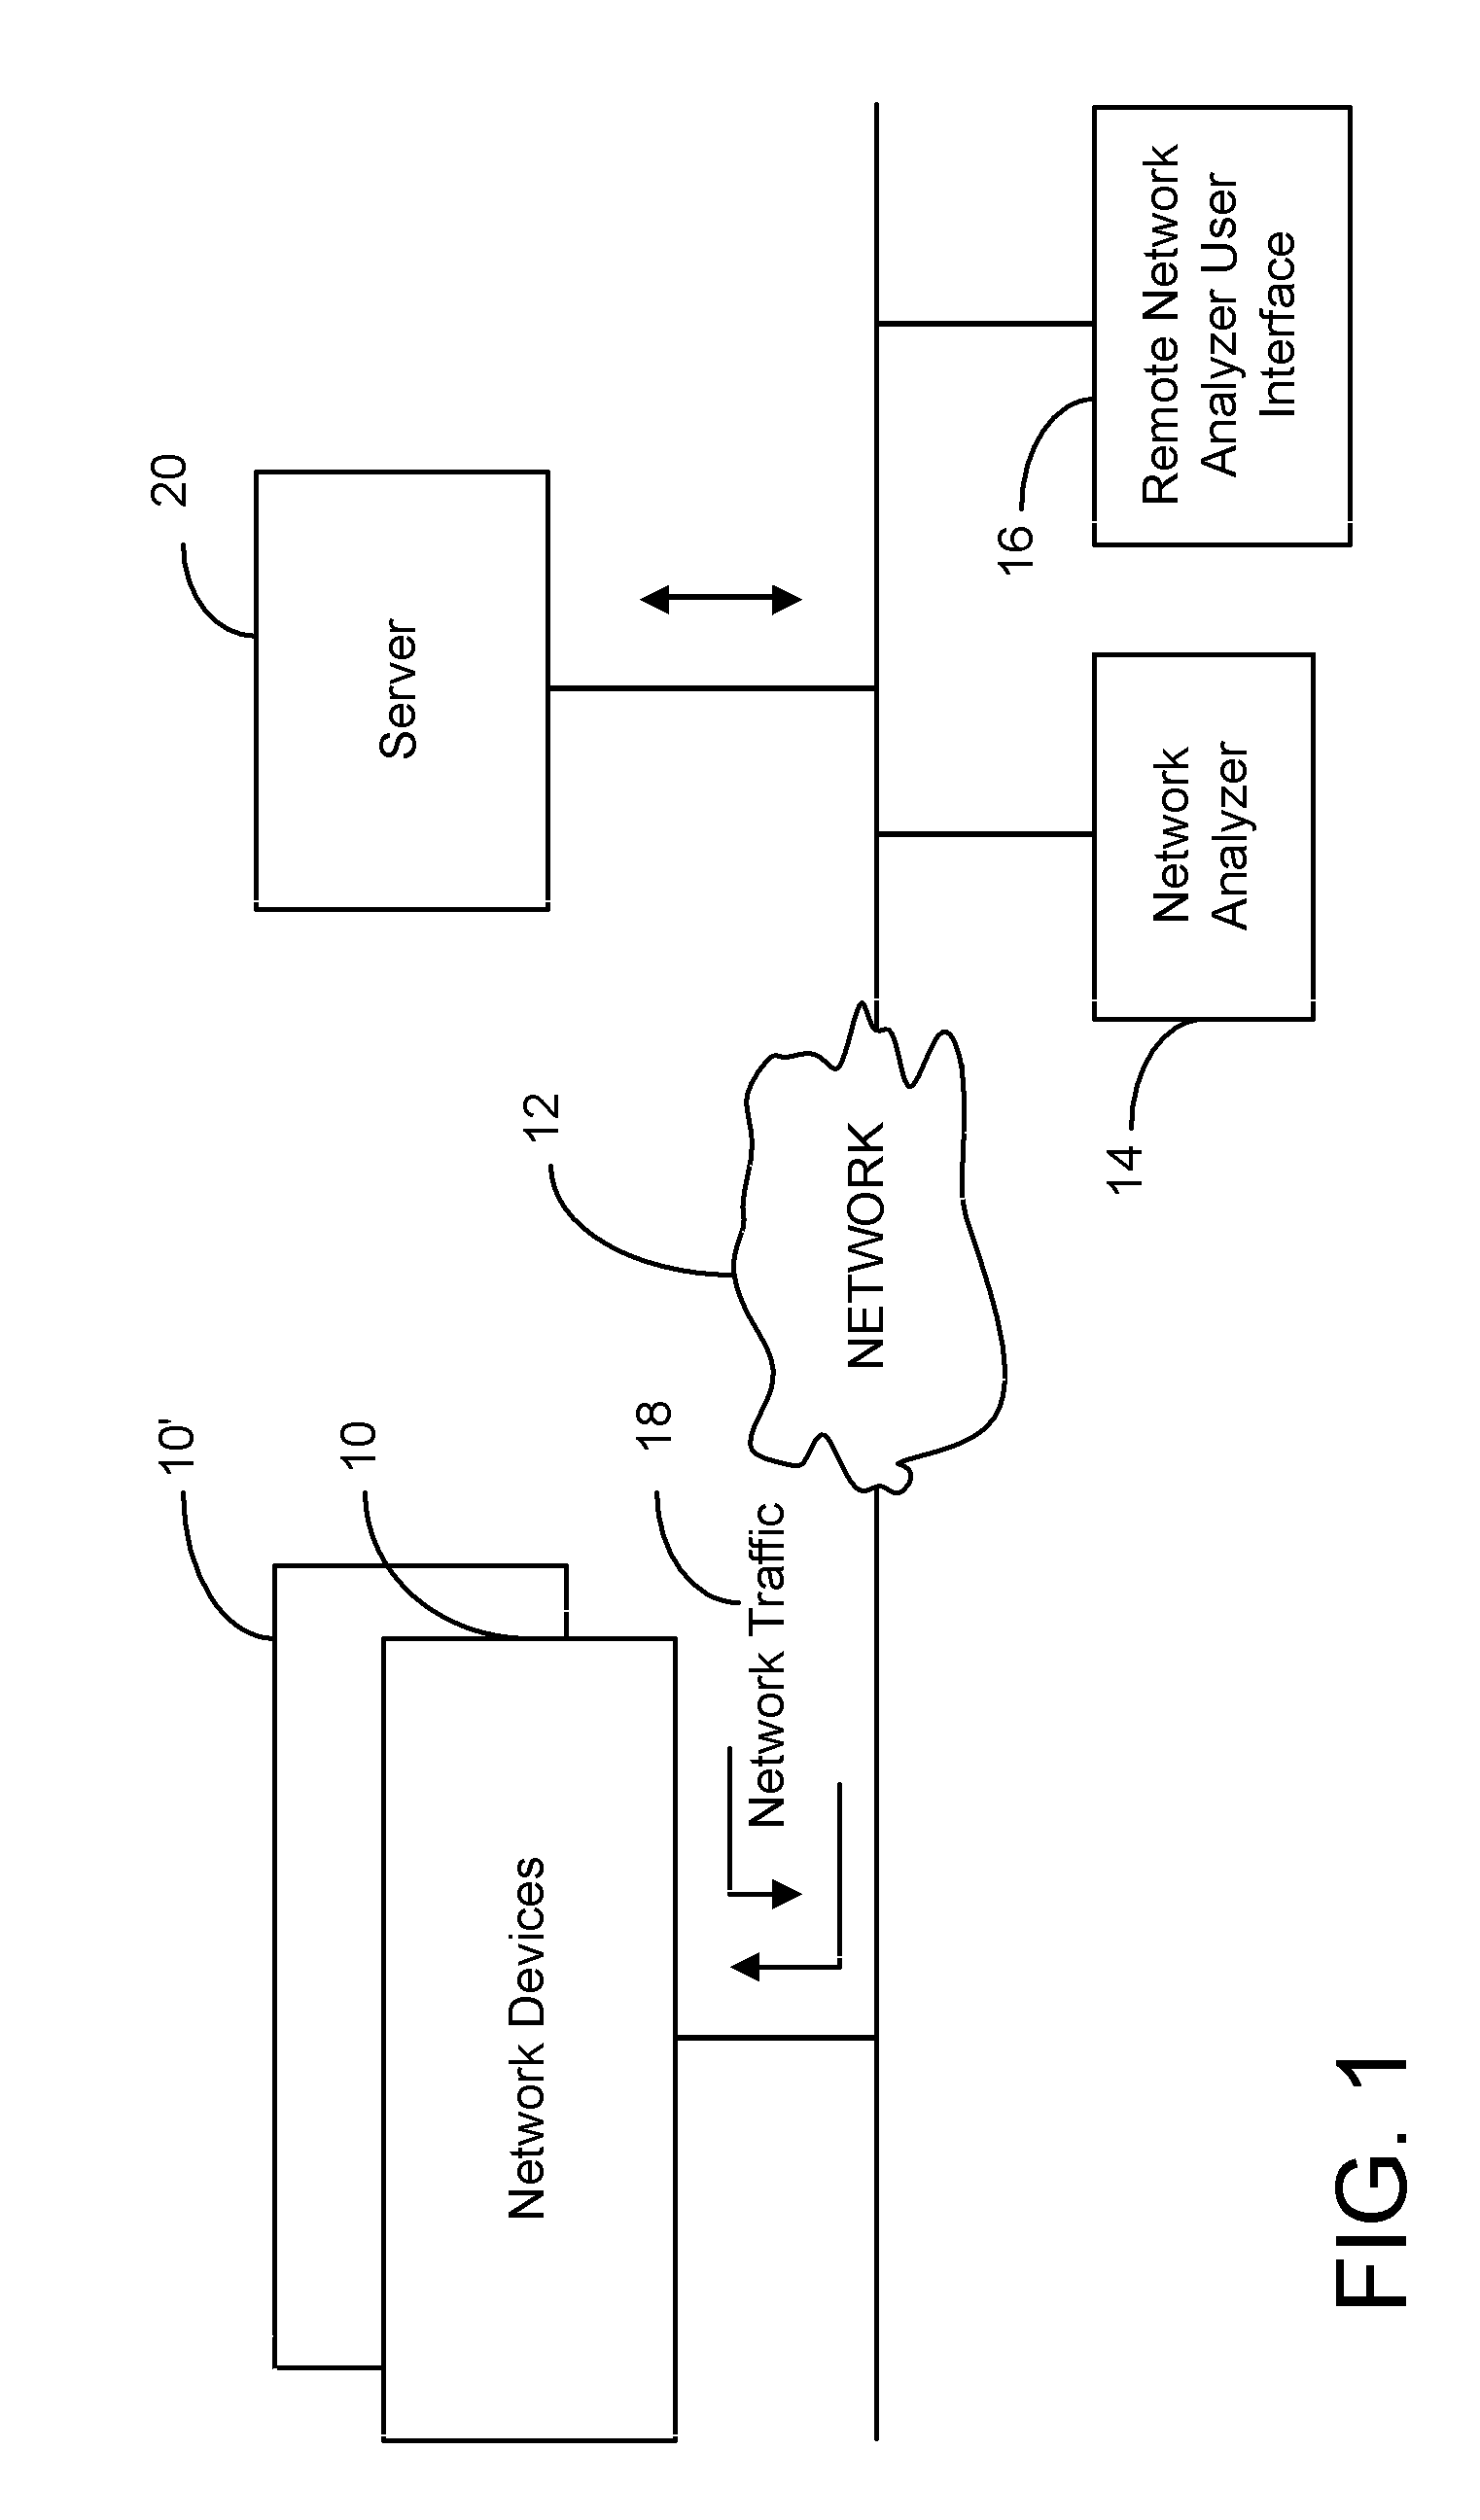 Method and apparatus of end-user response time determination for both TCP and non-TCP protocols